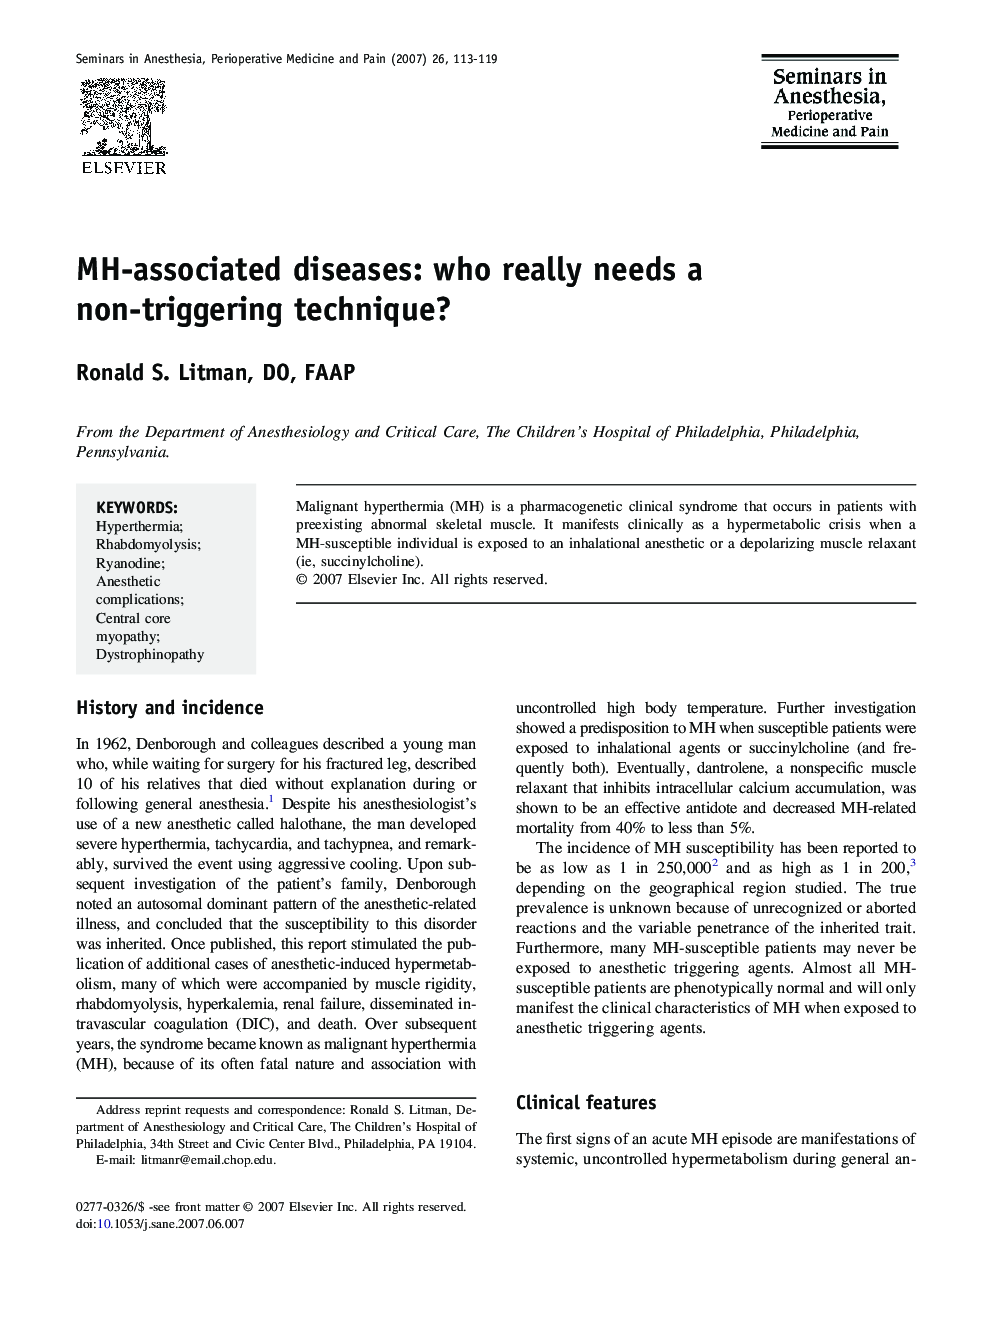 MH-associated diseases: who really needs a non-triggering technique?